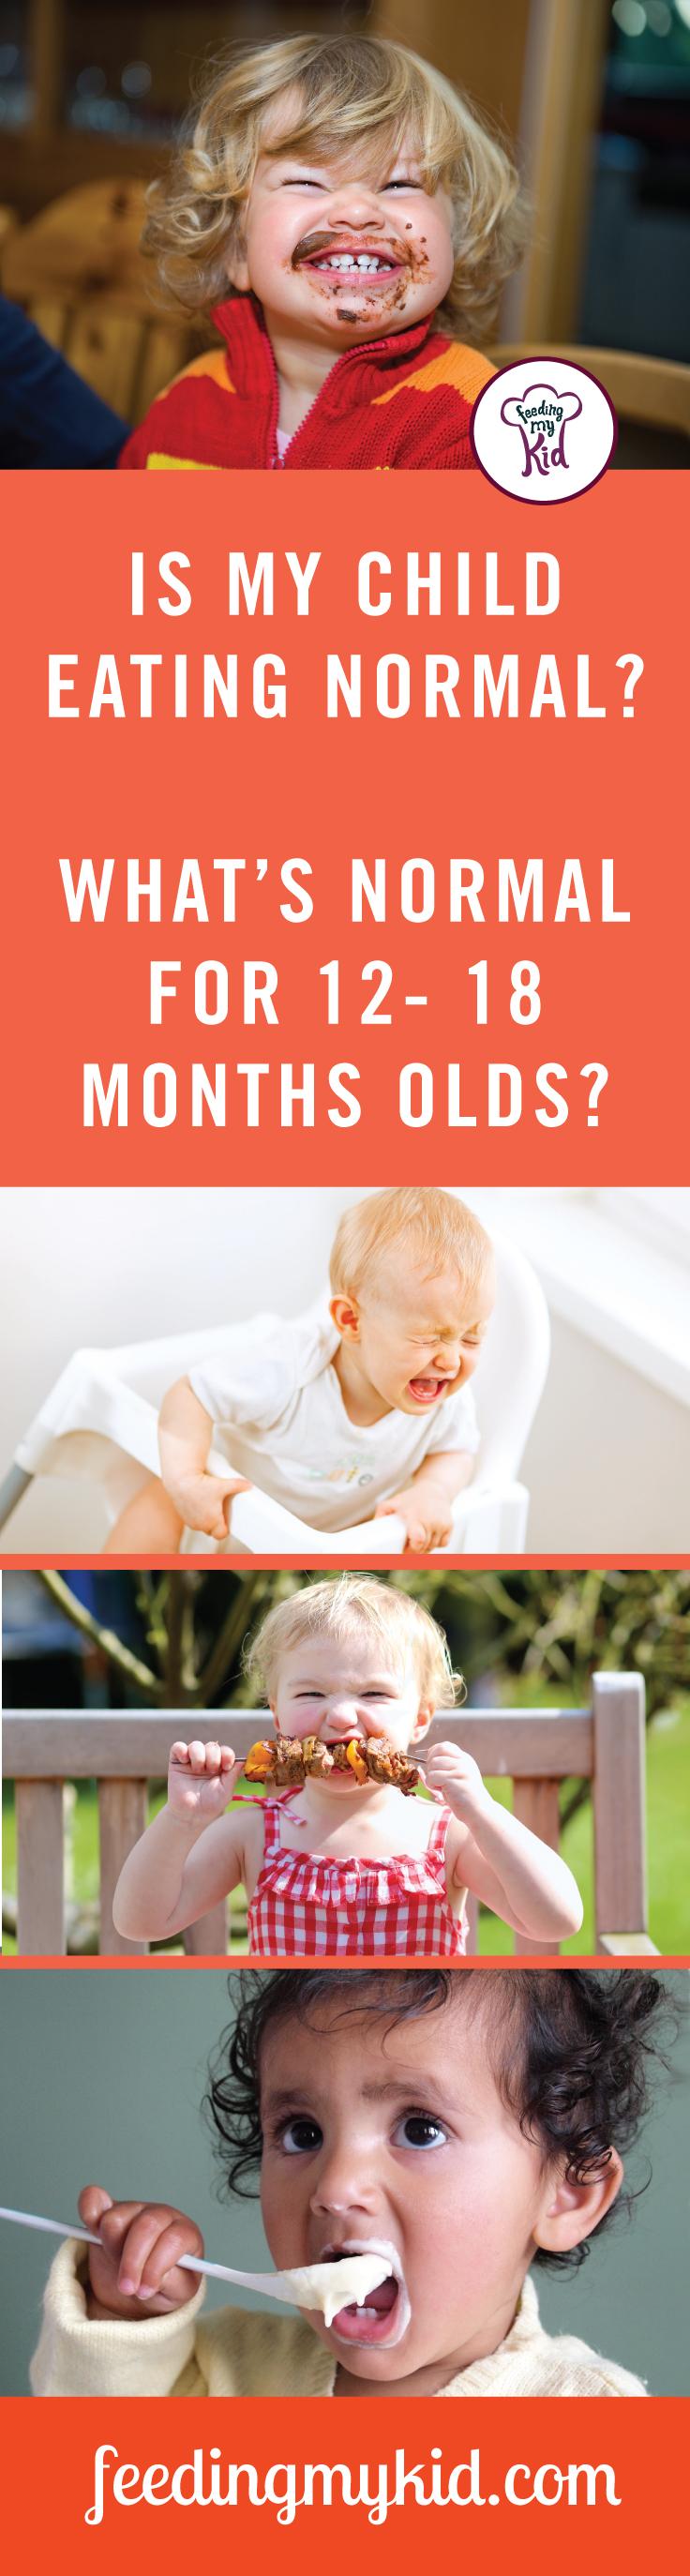 Is your child an under eater?How much should a 12 month old eat? Find out everything you need to know in this article. Feeding My Kid is a filled with all the information you need about how to raise your kids, from healthy tips to nutritious recipes. #undereater #pickyeater #parenting